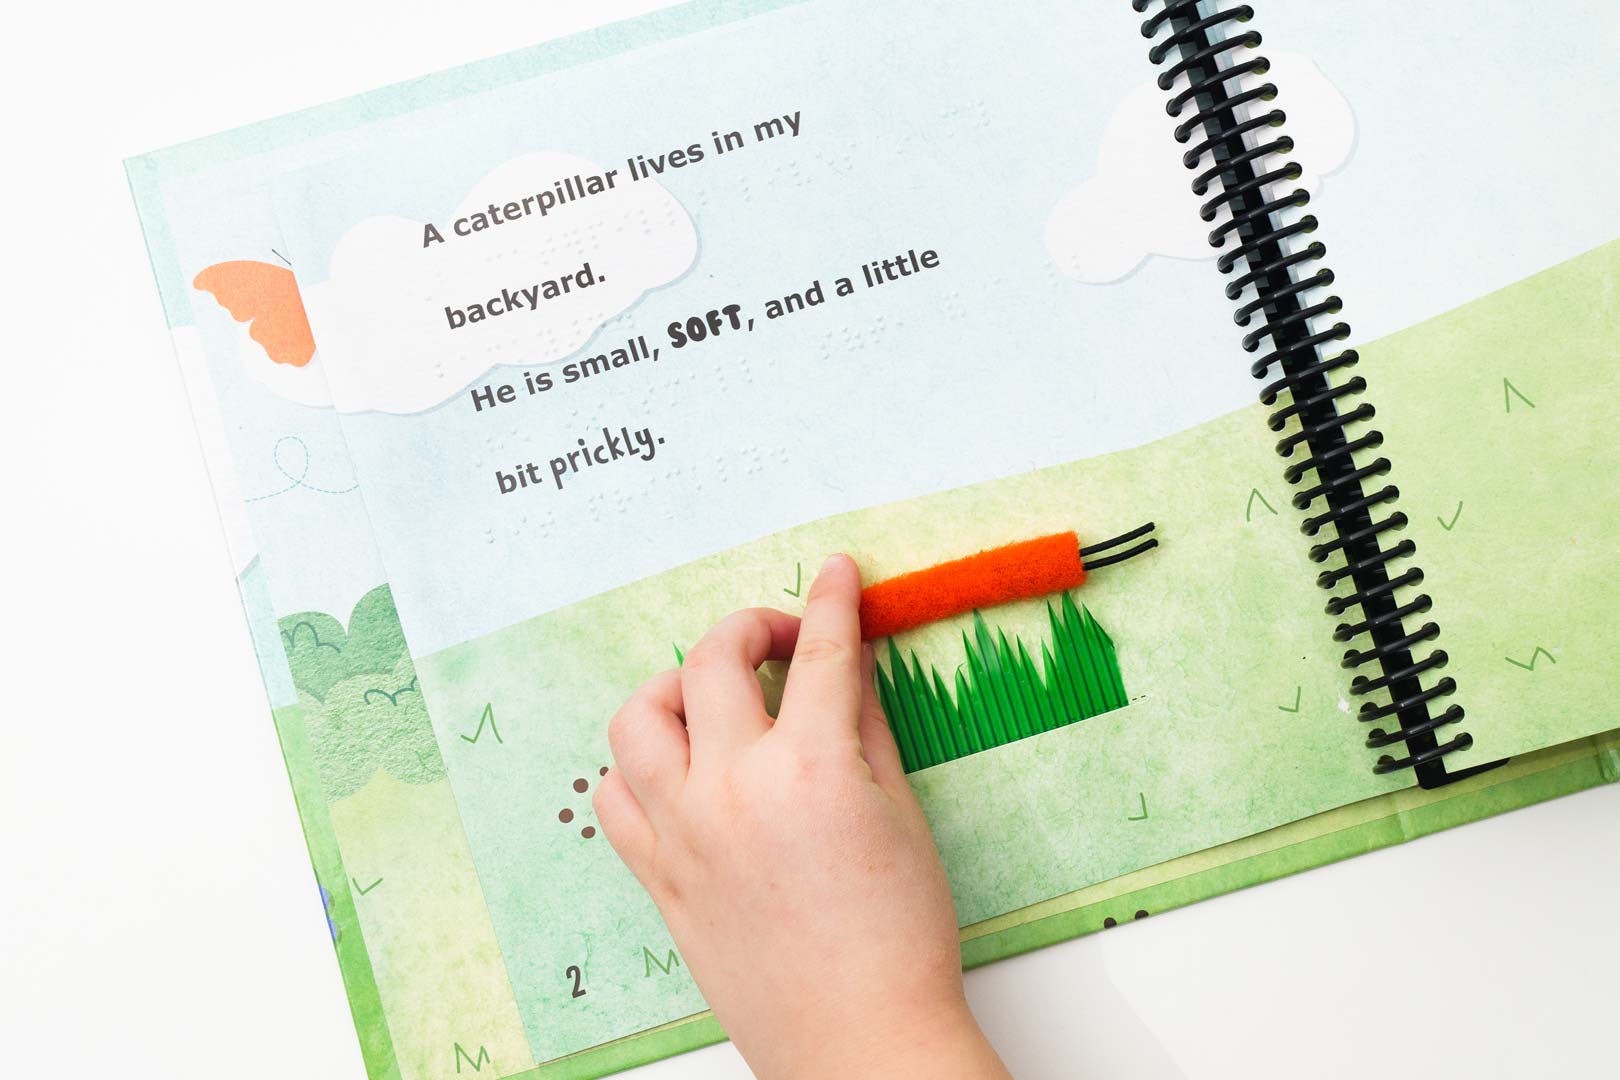 A child uses their hand to move the orange caterpillar across a patch of tall, green grass with the text and braille on the page reading, “A caterpillar in my backyard. He is small, SOFT, and a little bit prickly.”